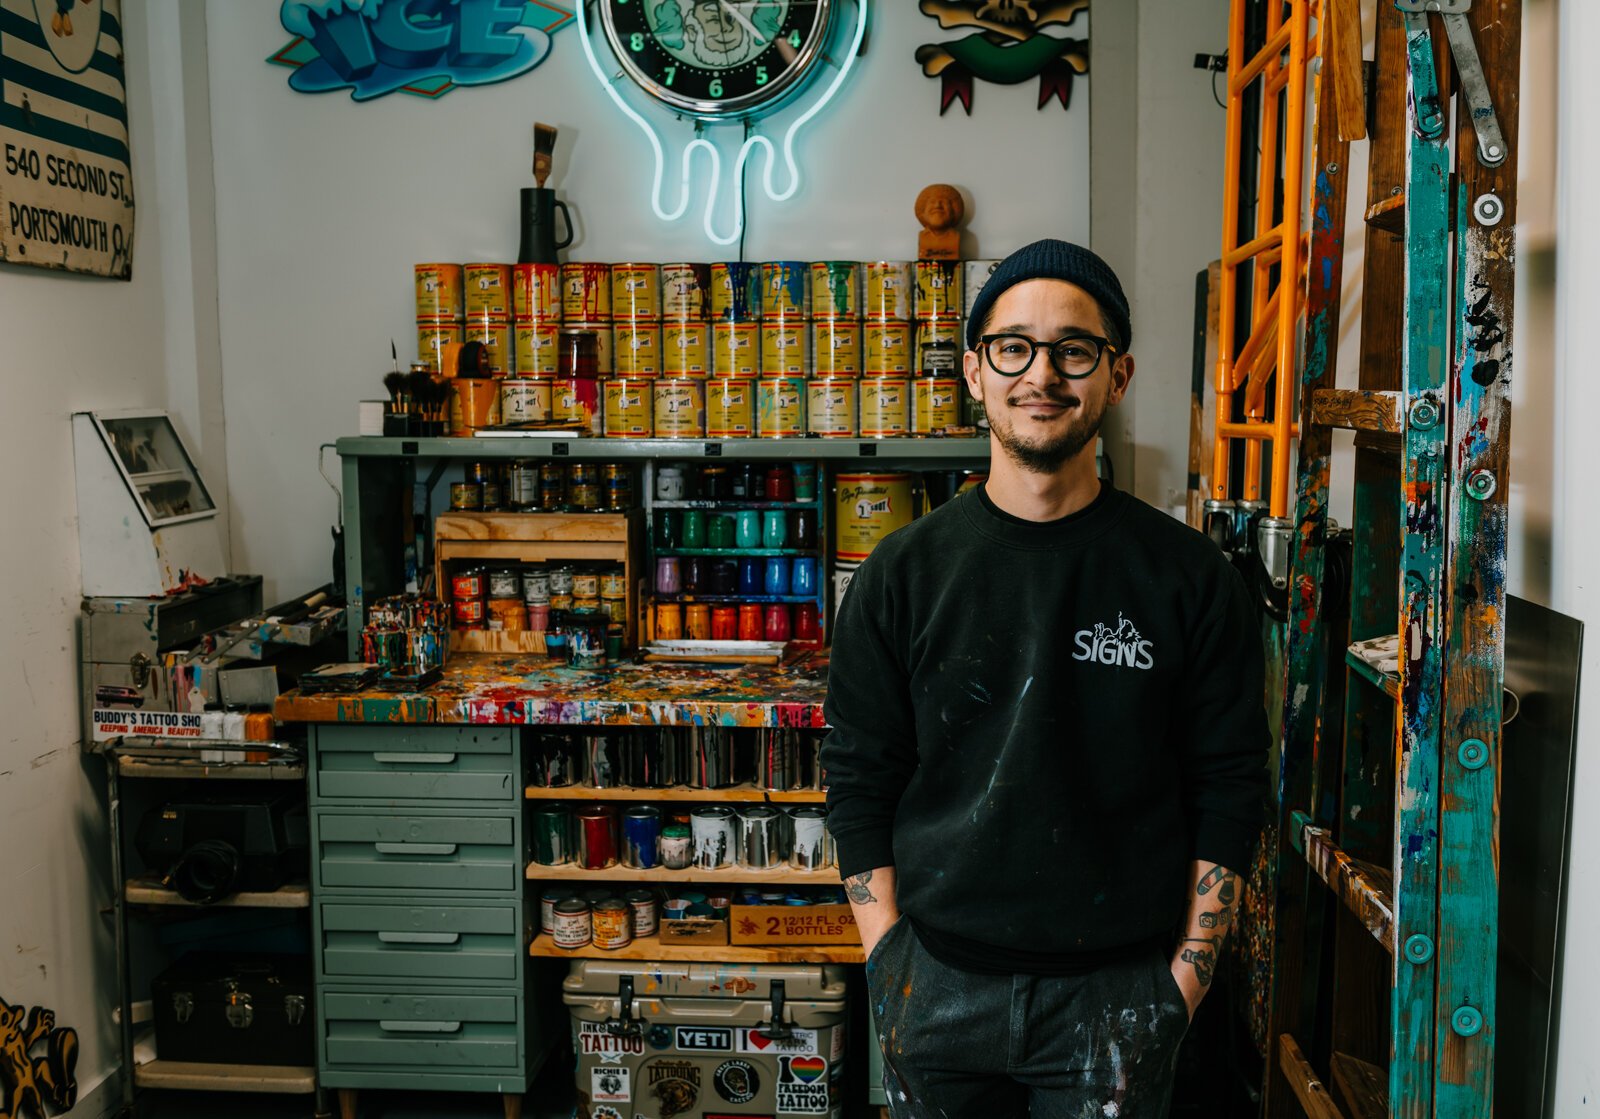  Justin Lim, owner of Old 5 and Dime Sign Co.